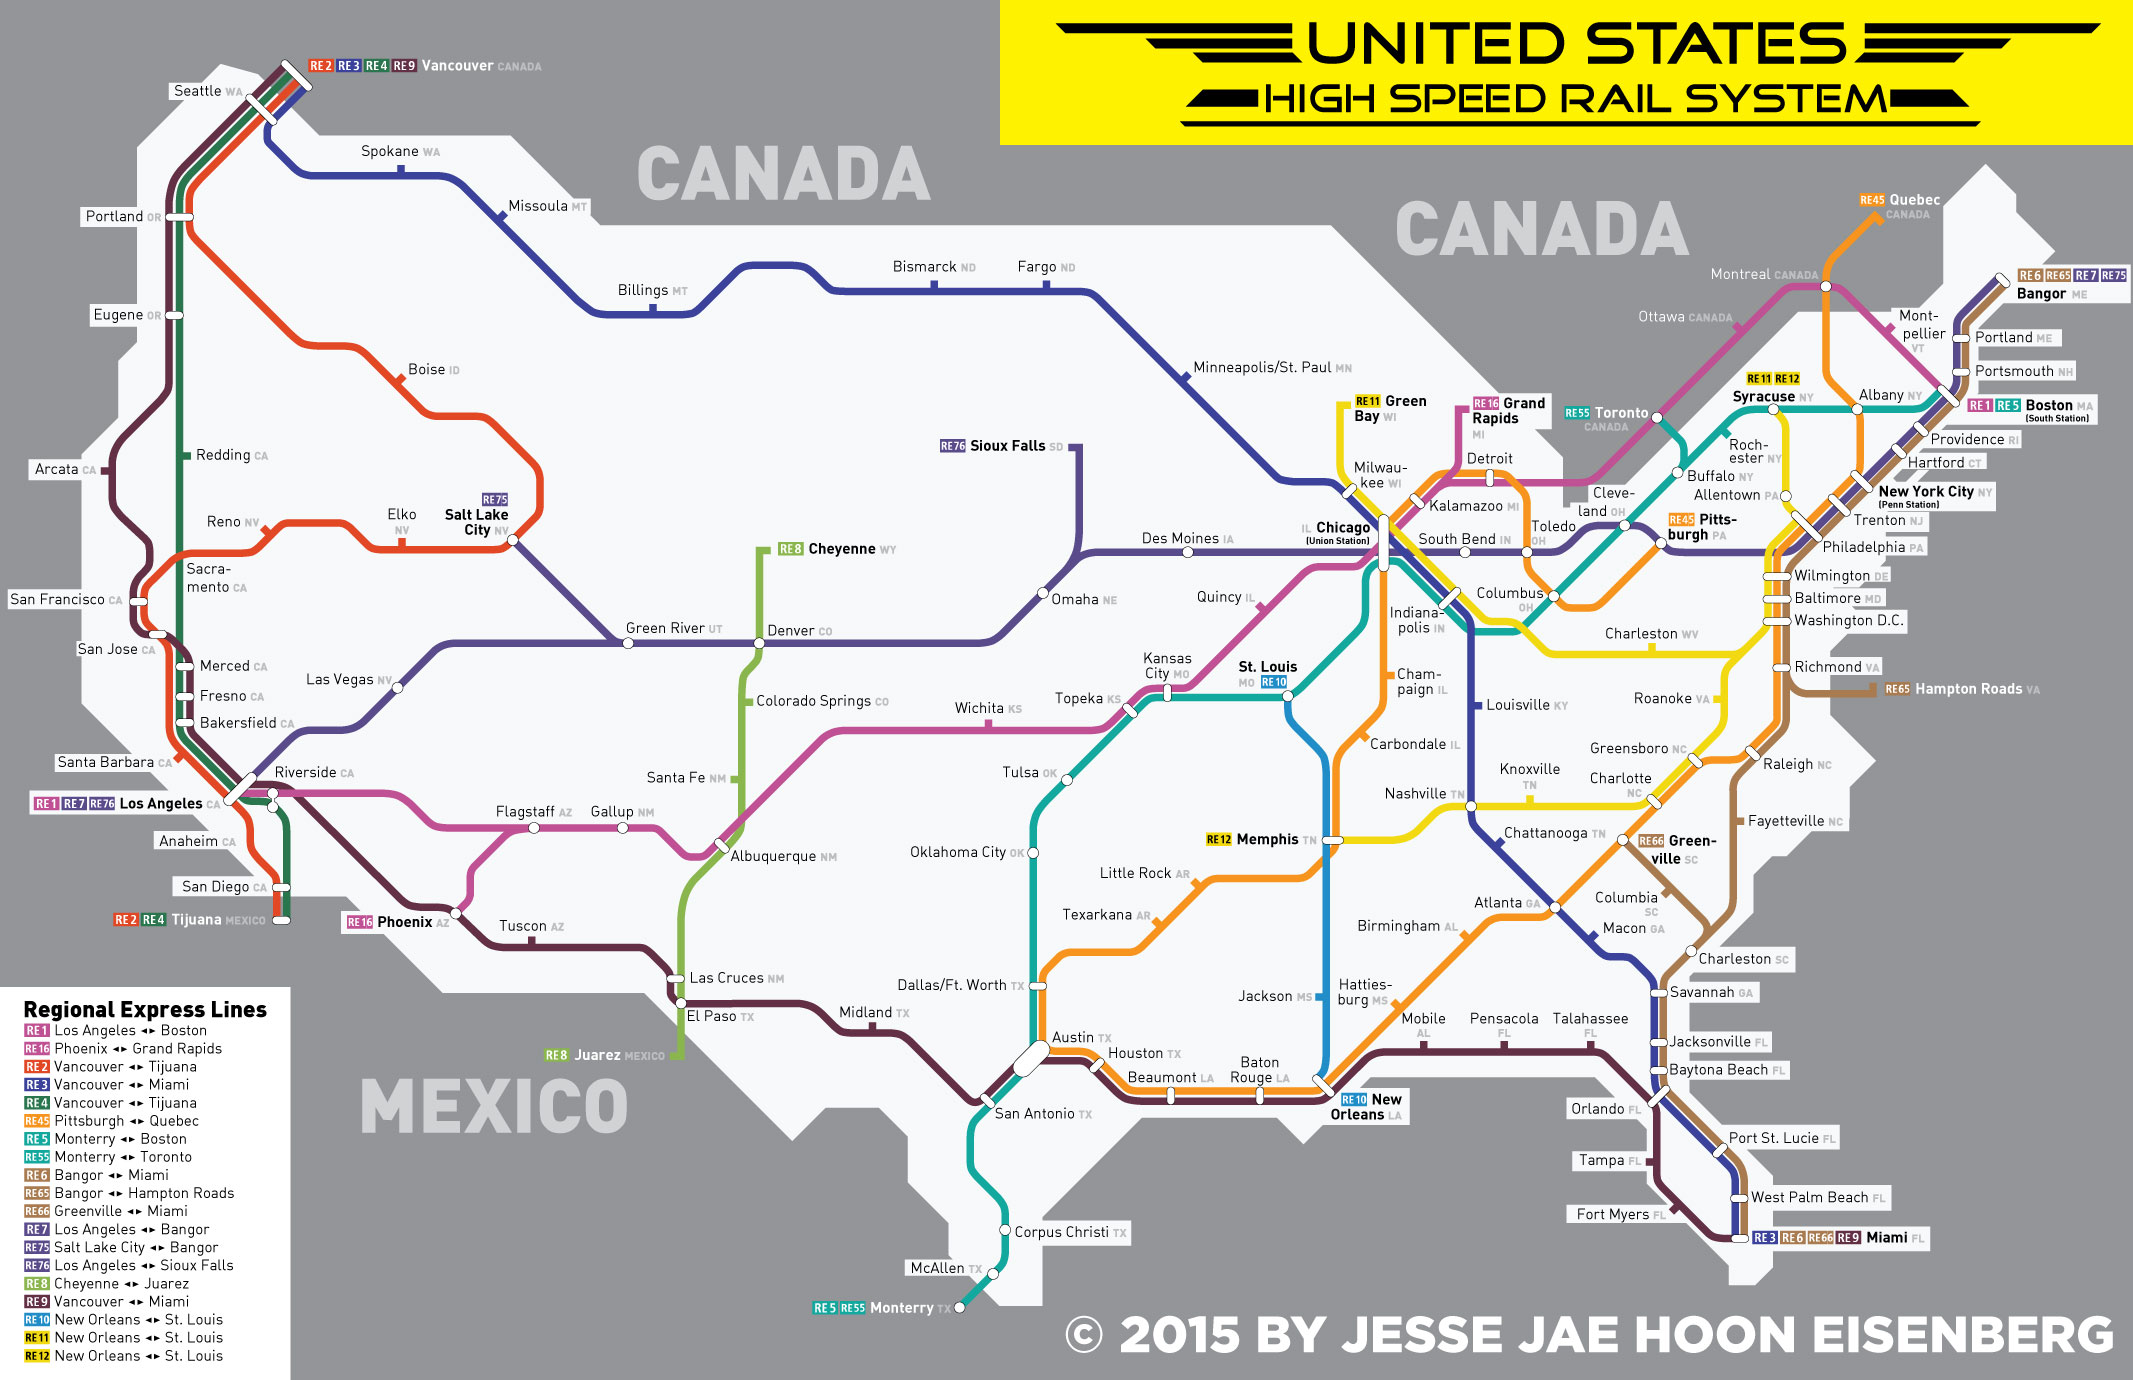 Re-Design of the Proposed U.S. High Speed Rail Map